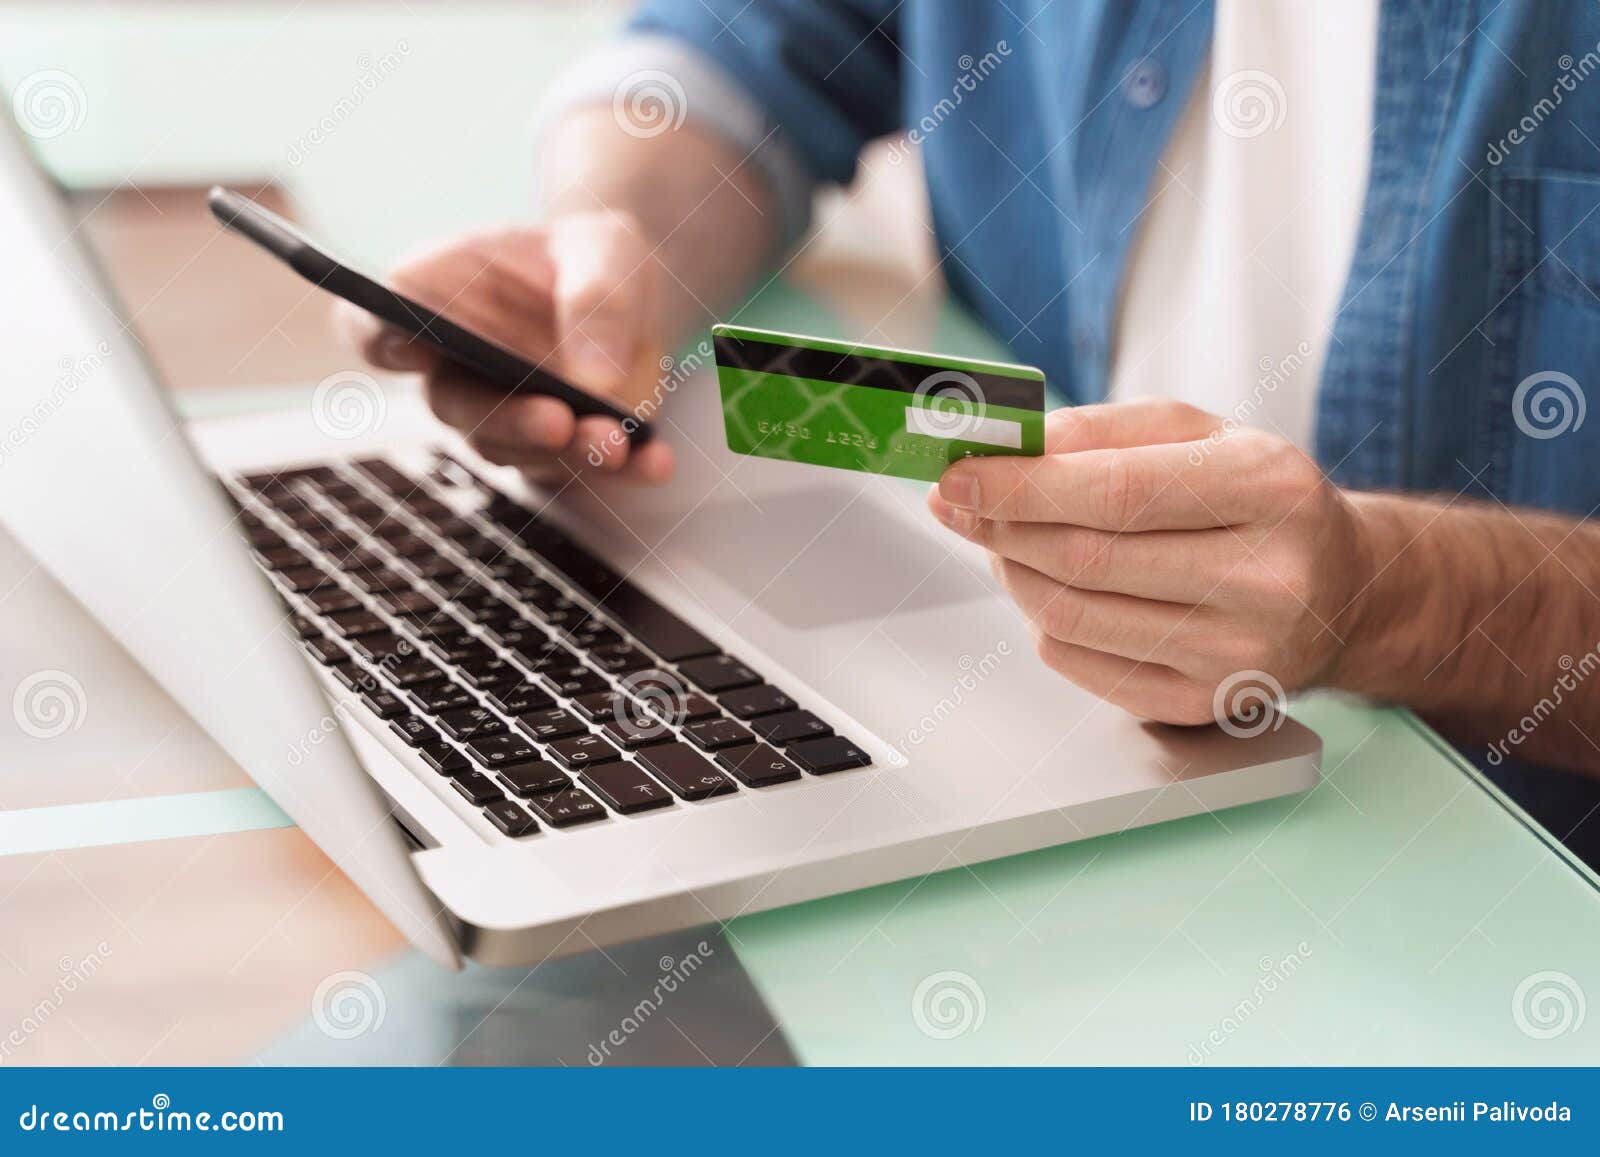 using gadgets and bank card for e-shopping and online banking